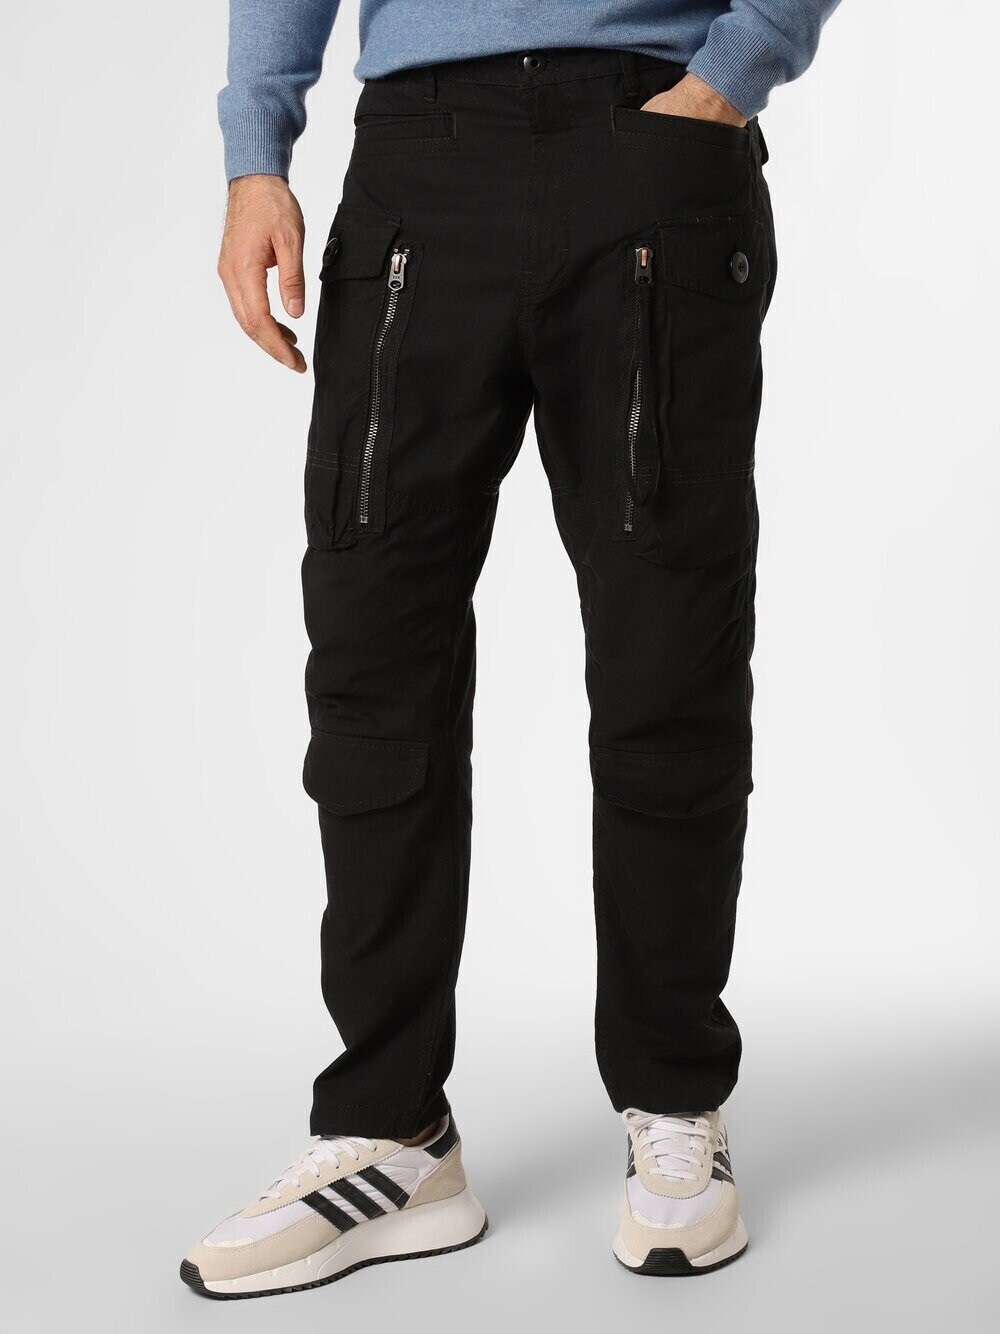 Mens Black GStar Trousers 52 Items in Stock  Stylight